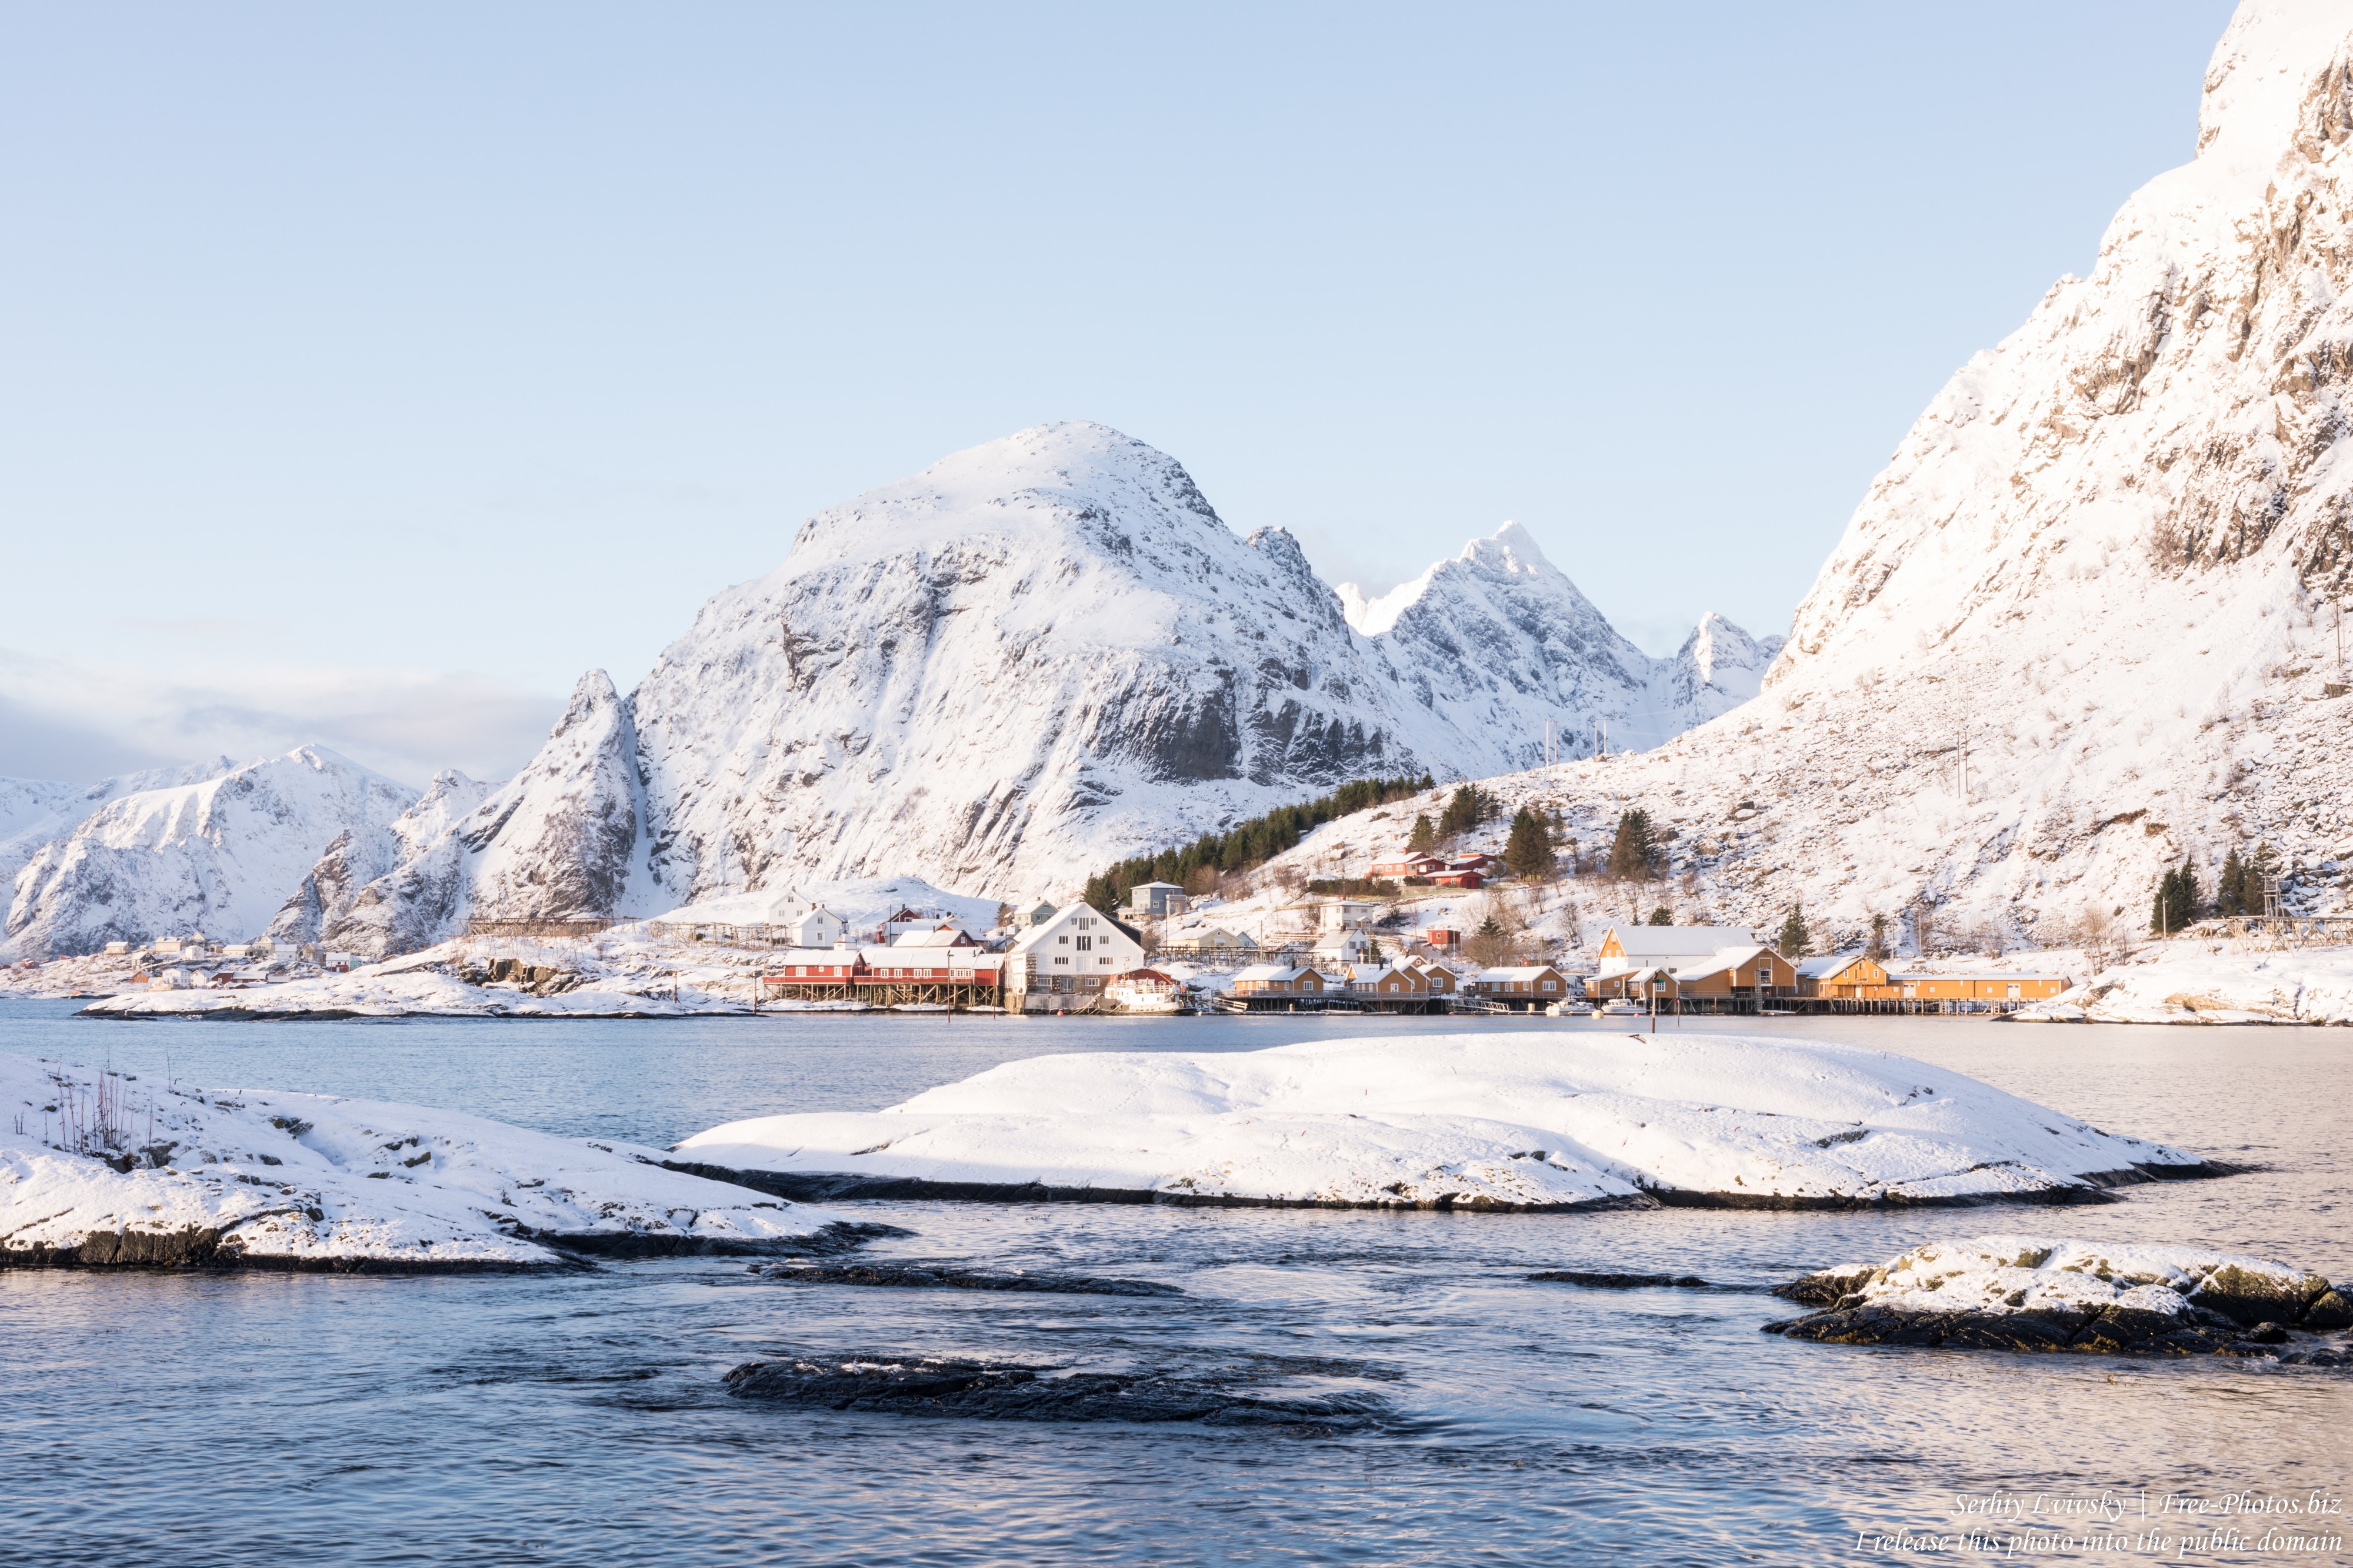 Å i Lofoten, Norway, in February 2020, photographed by Serhiy Lvivsky, picture 19